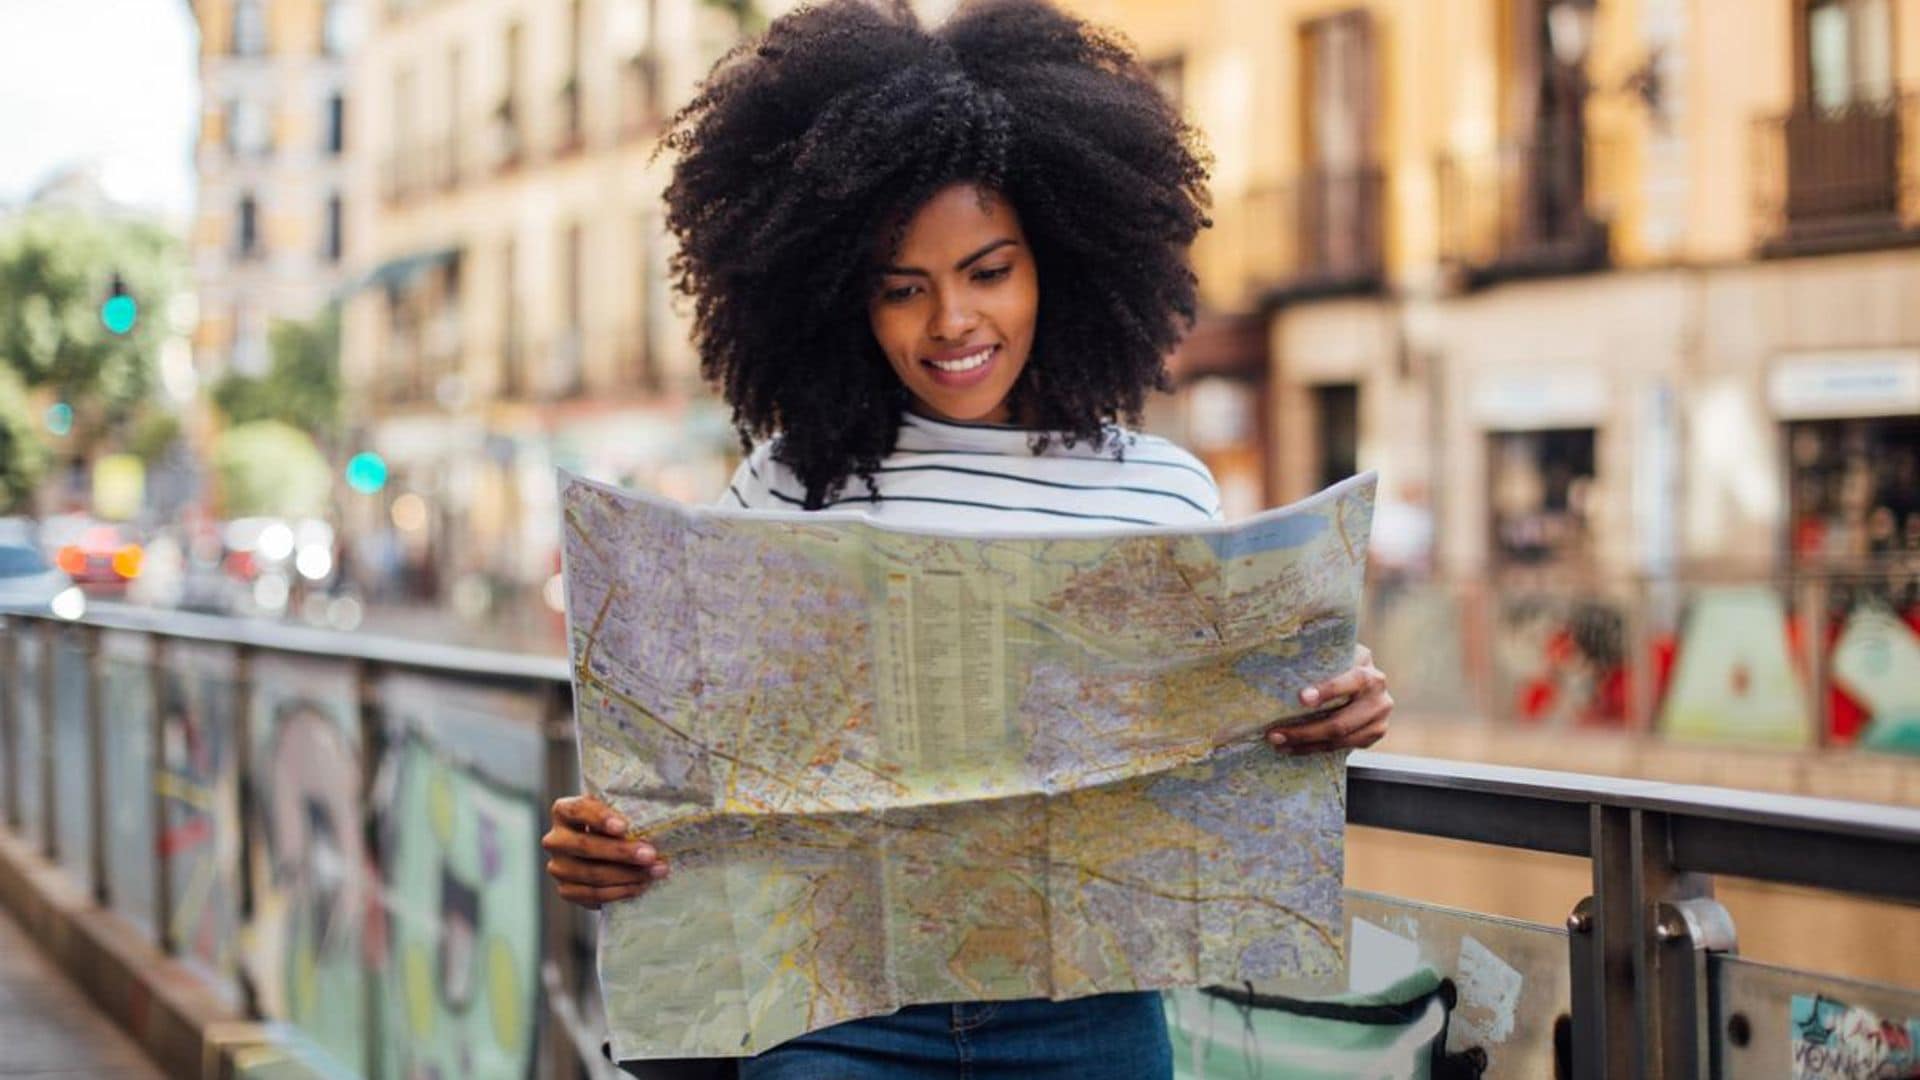 Women-focused experiences and trips: Top destinations and adventures for solo female travelers